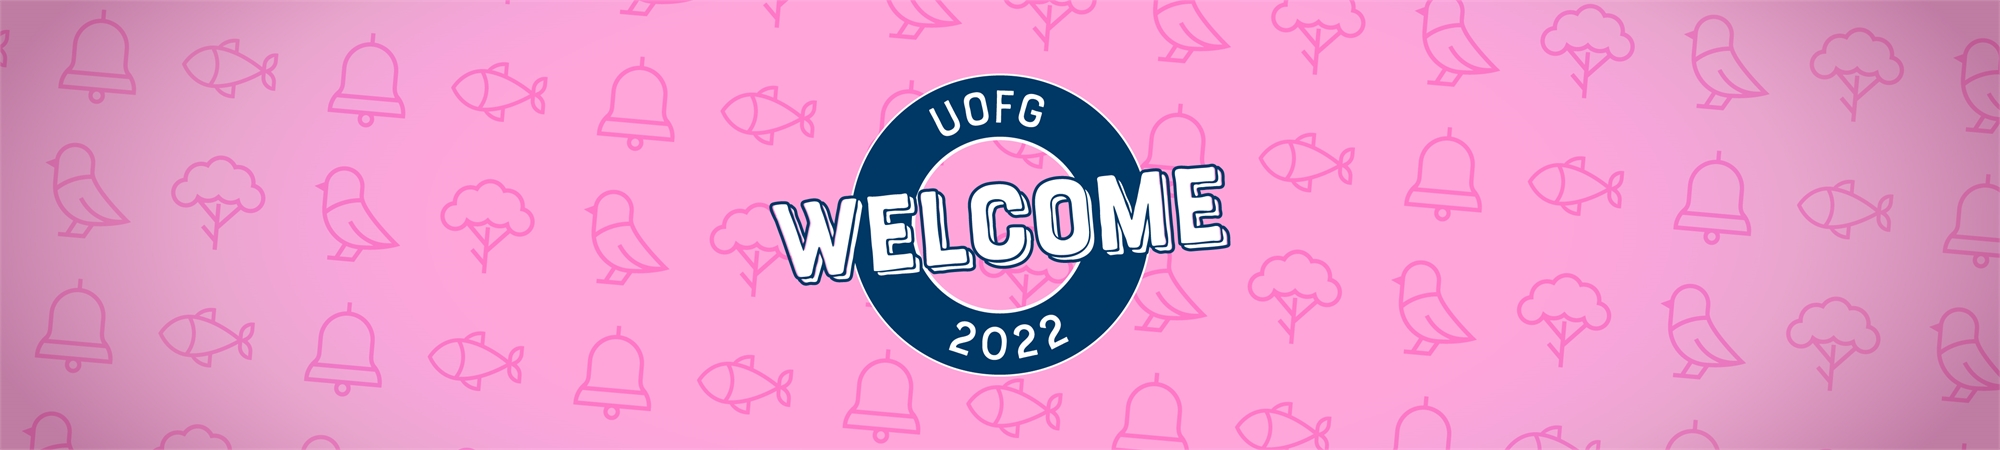 UofG January Welcome 2022 | About